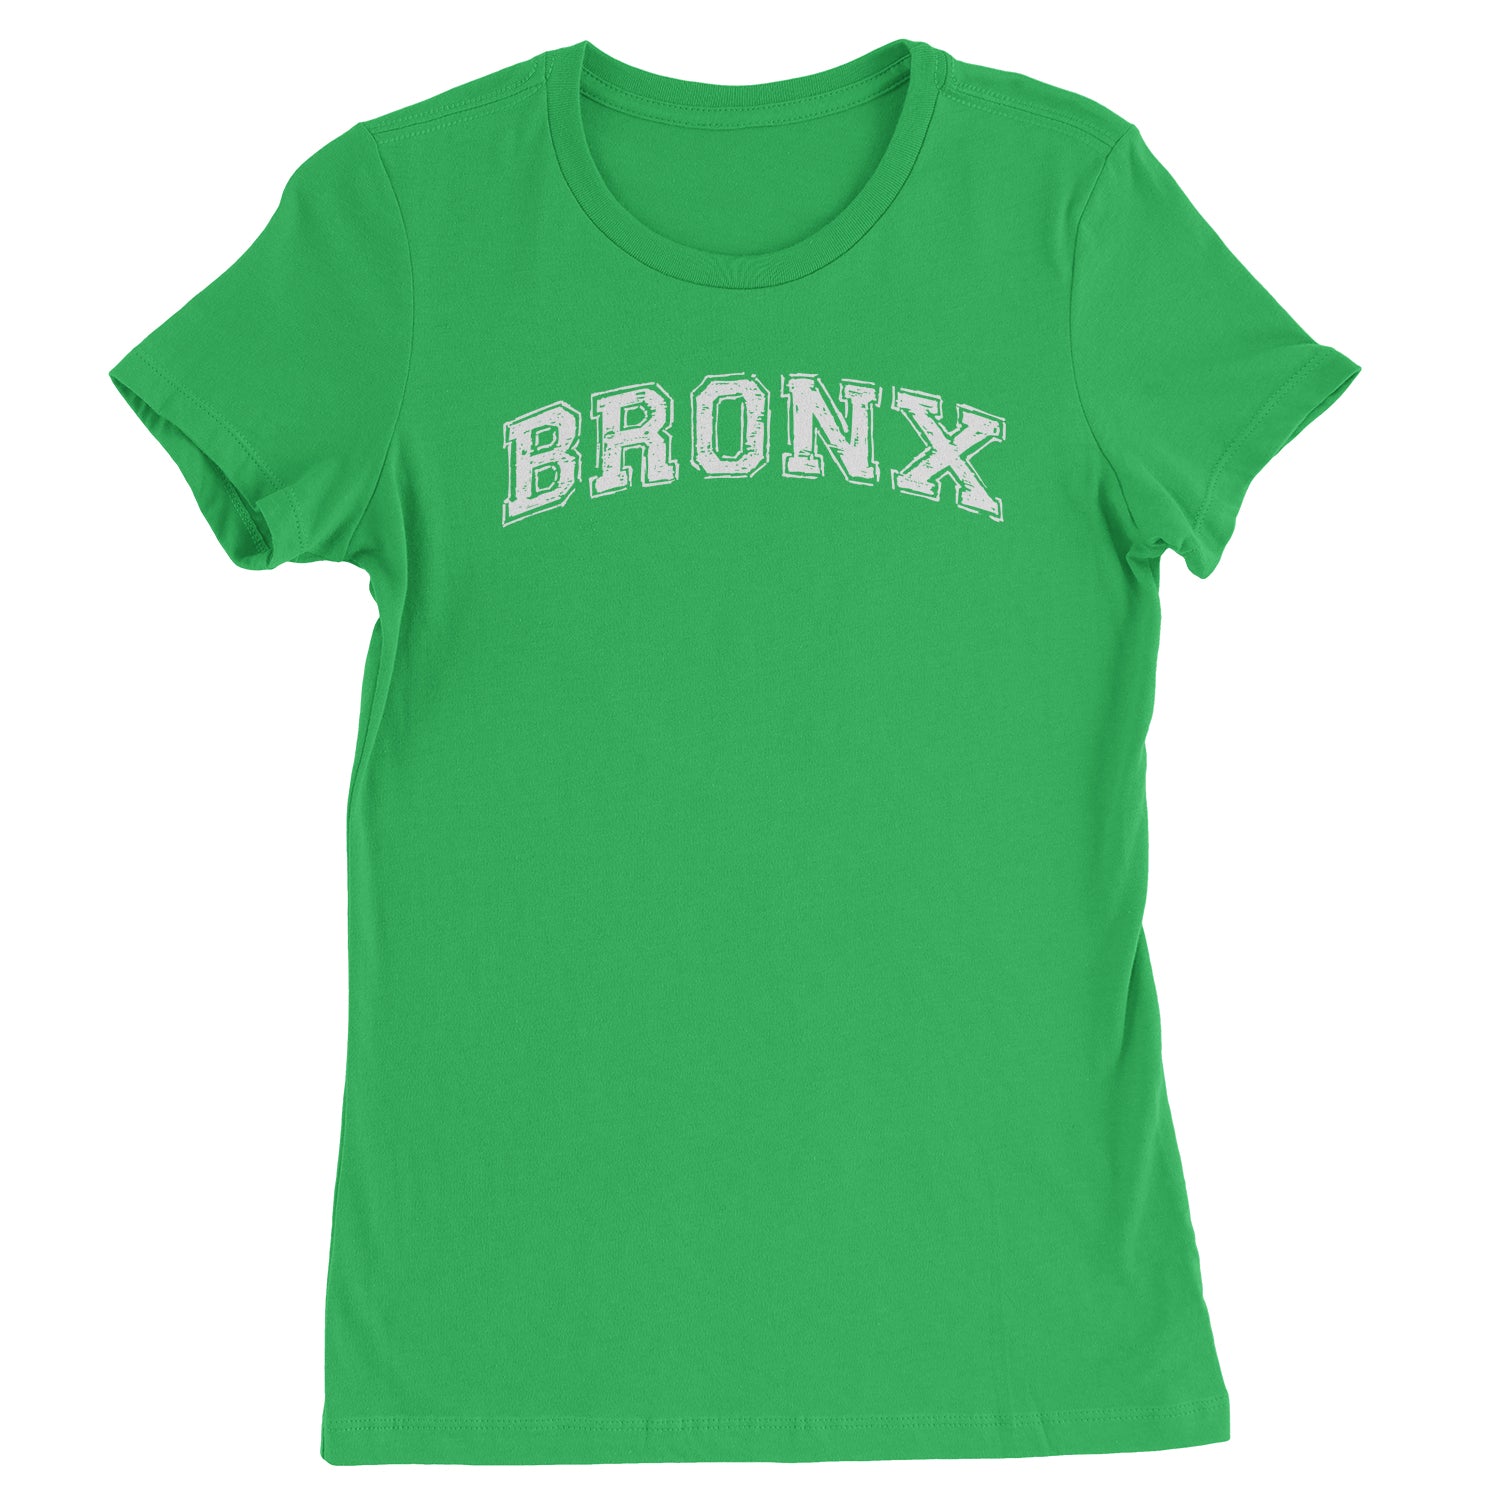 Bronx - From The Block Womens T-shirt b, cardi, concert, its, Jennifer, lopez, merch, my, party, tour by Expression Tees